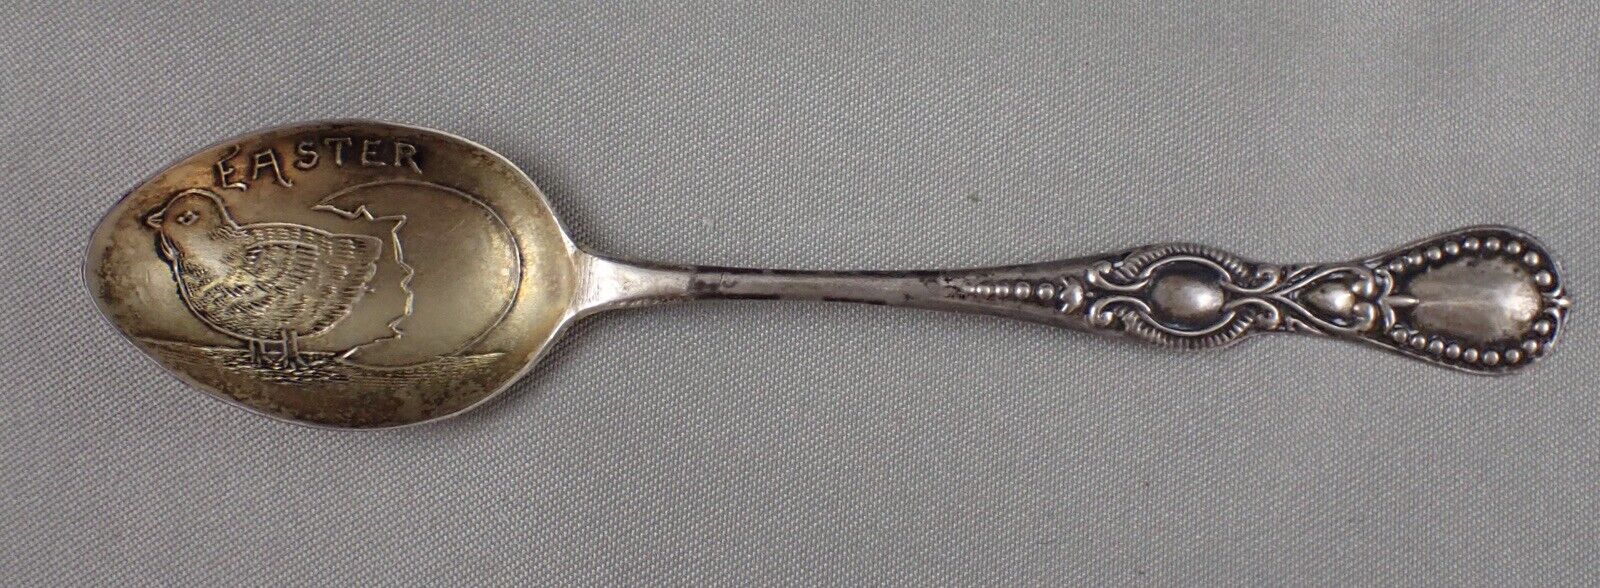 Tiny Antique Easter Chick & Egg Sterling Silver Spoon 